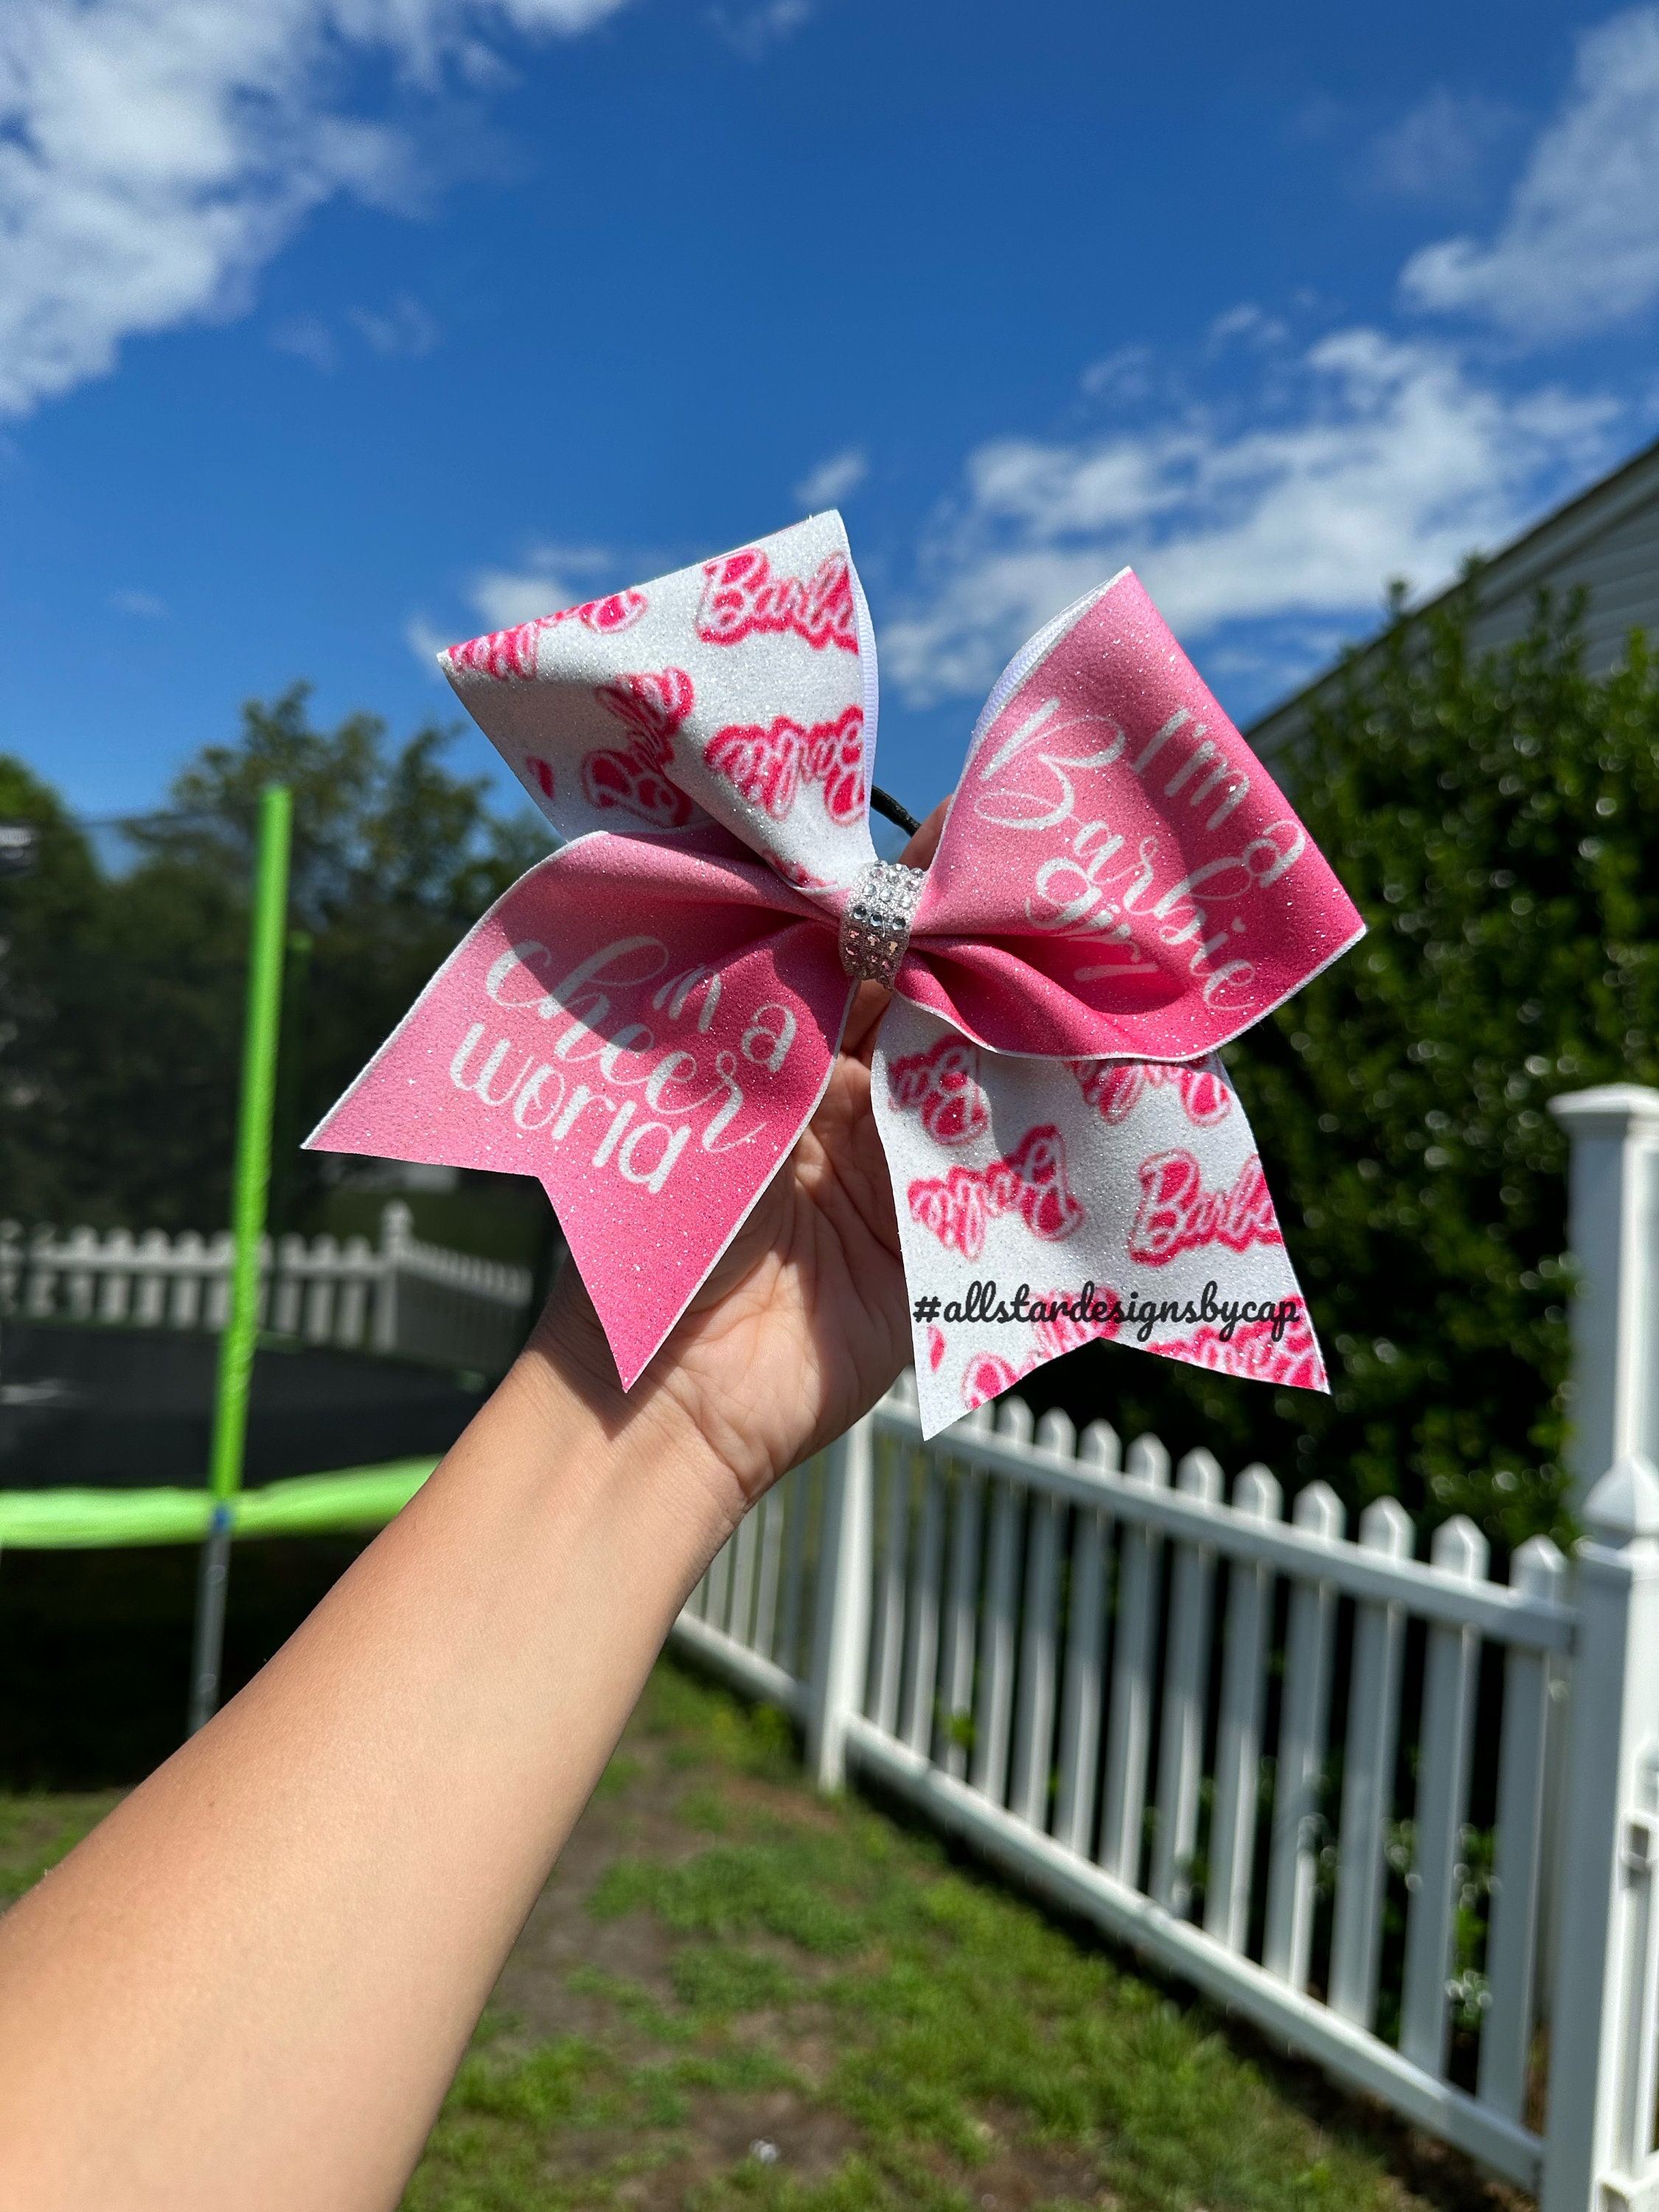 Pin Me Ribbon, Cheerleader Gifts, Bookbag Accessories, Keychain Bows,  Personalized Gifts, All Star Cheer, Keychain Accessories 